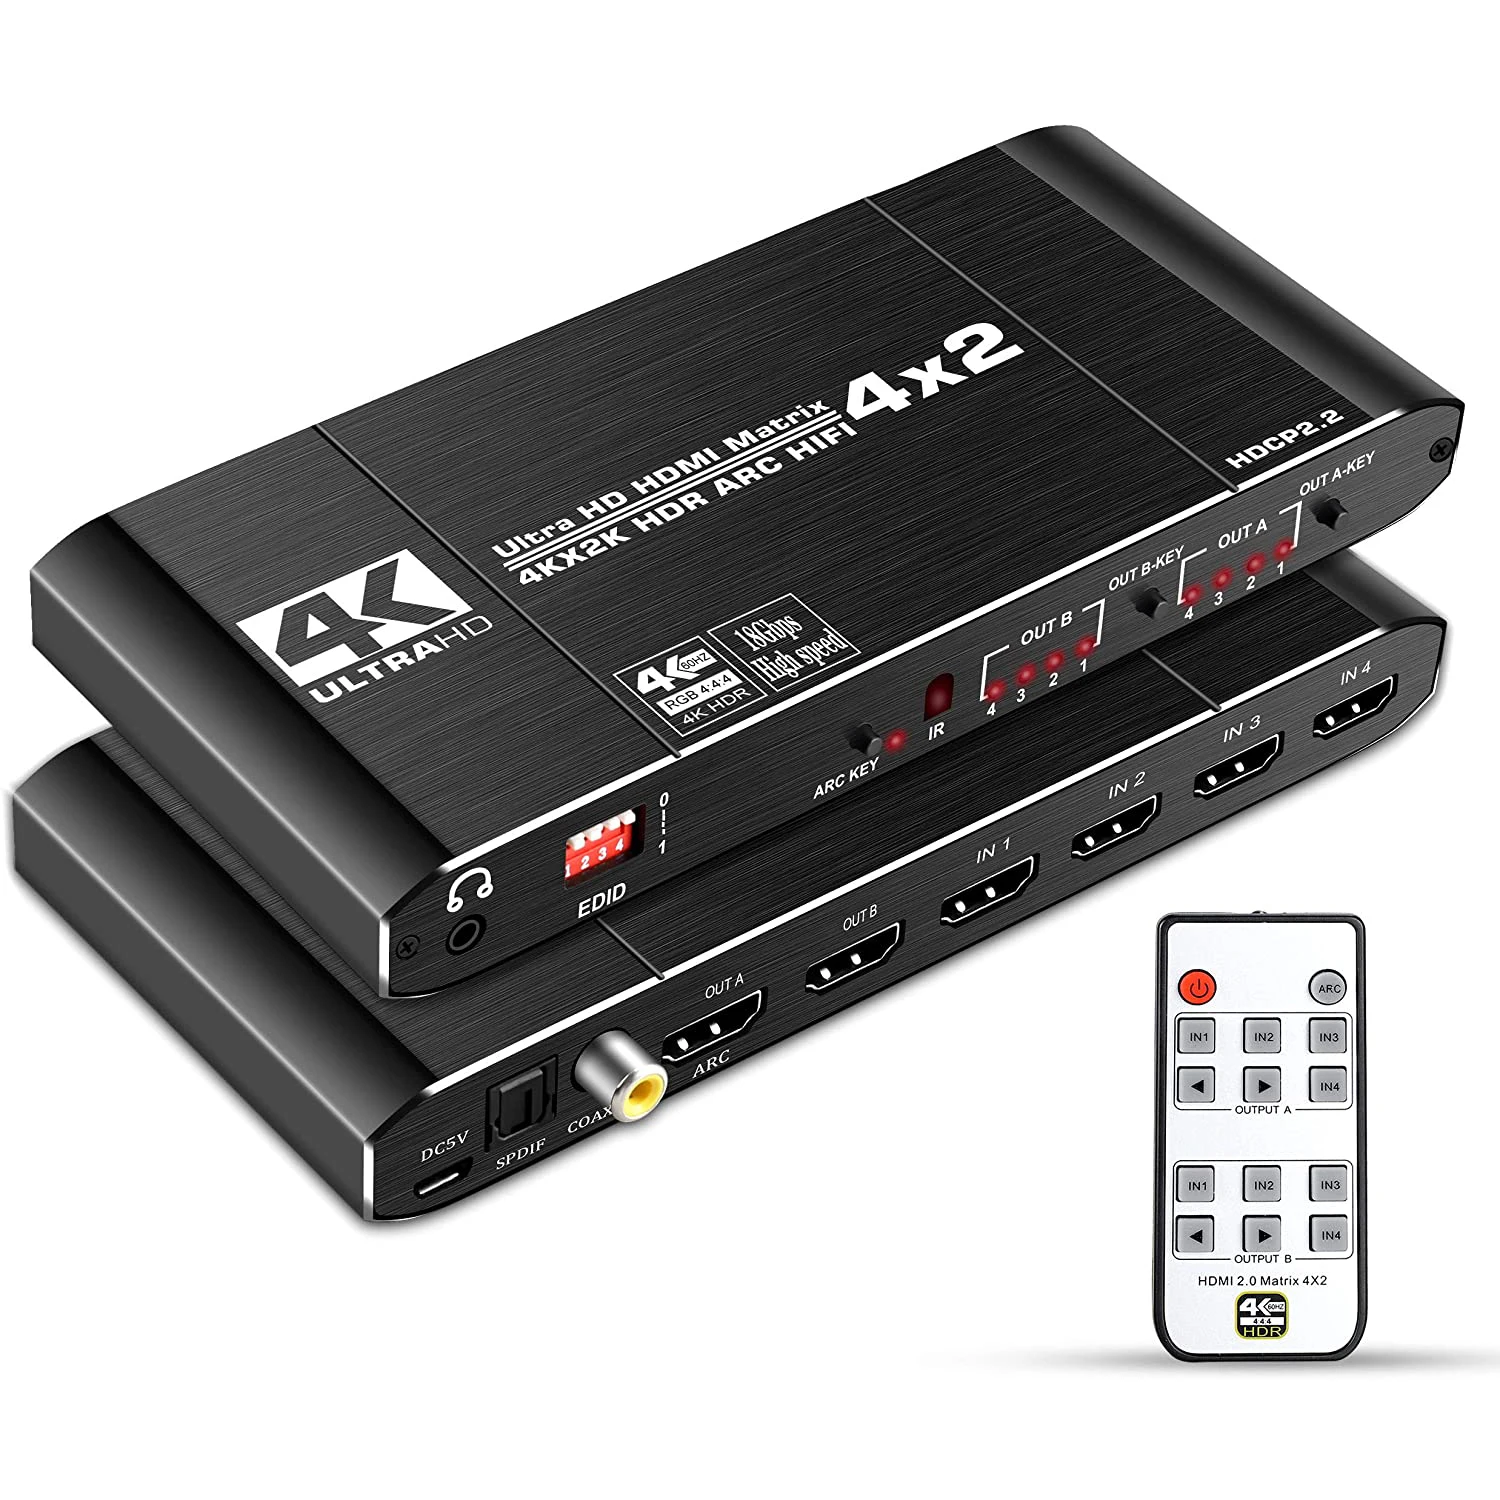 

4K 60Hz 4x2 HDMI Matrix Switch 18.5 Gbps HDMI-compatible Switch Splitter with L/R 3.5mm HDR and SPDIF 4x2 Support HDCP 2.2 3D